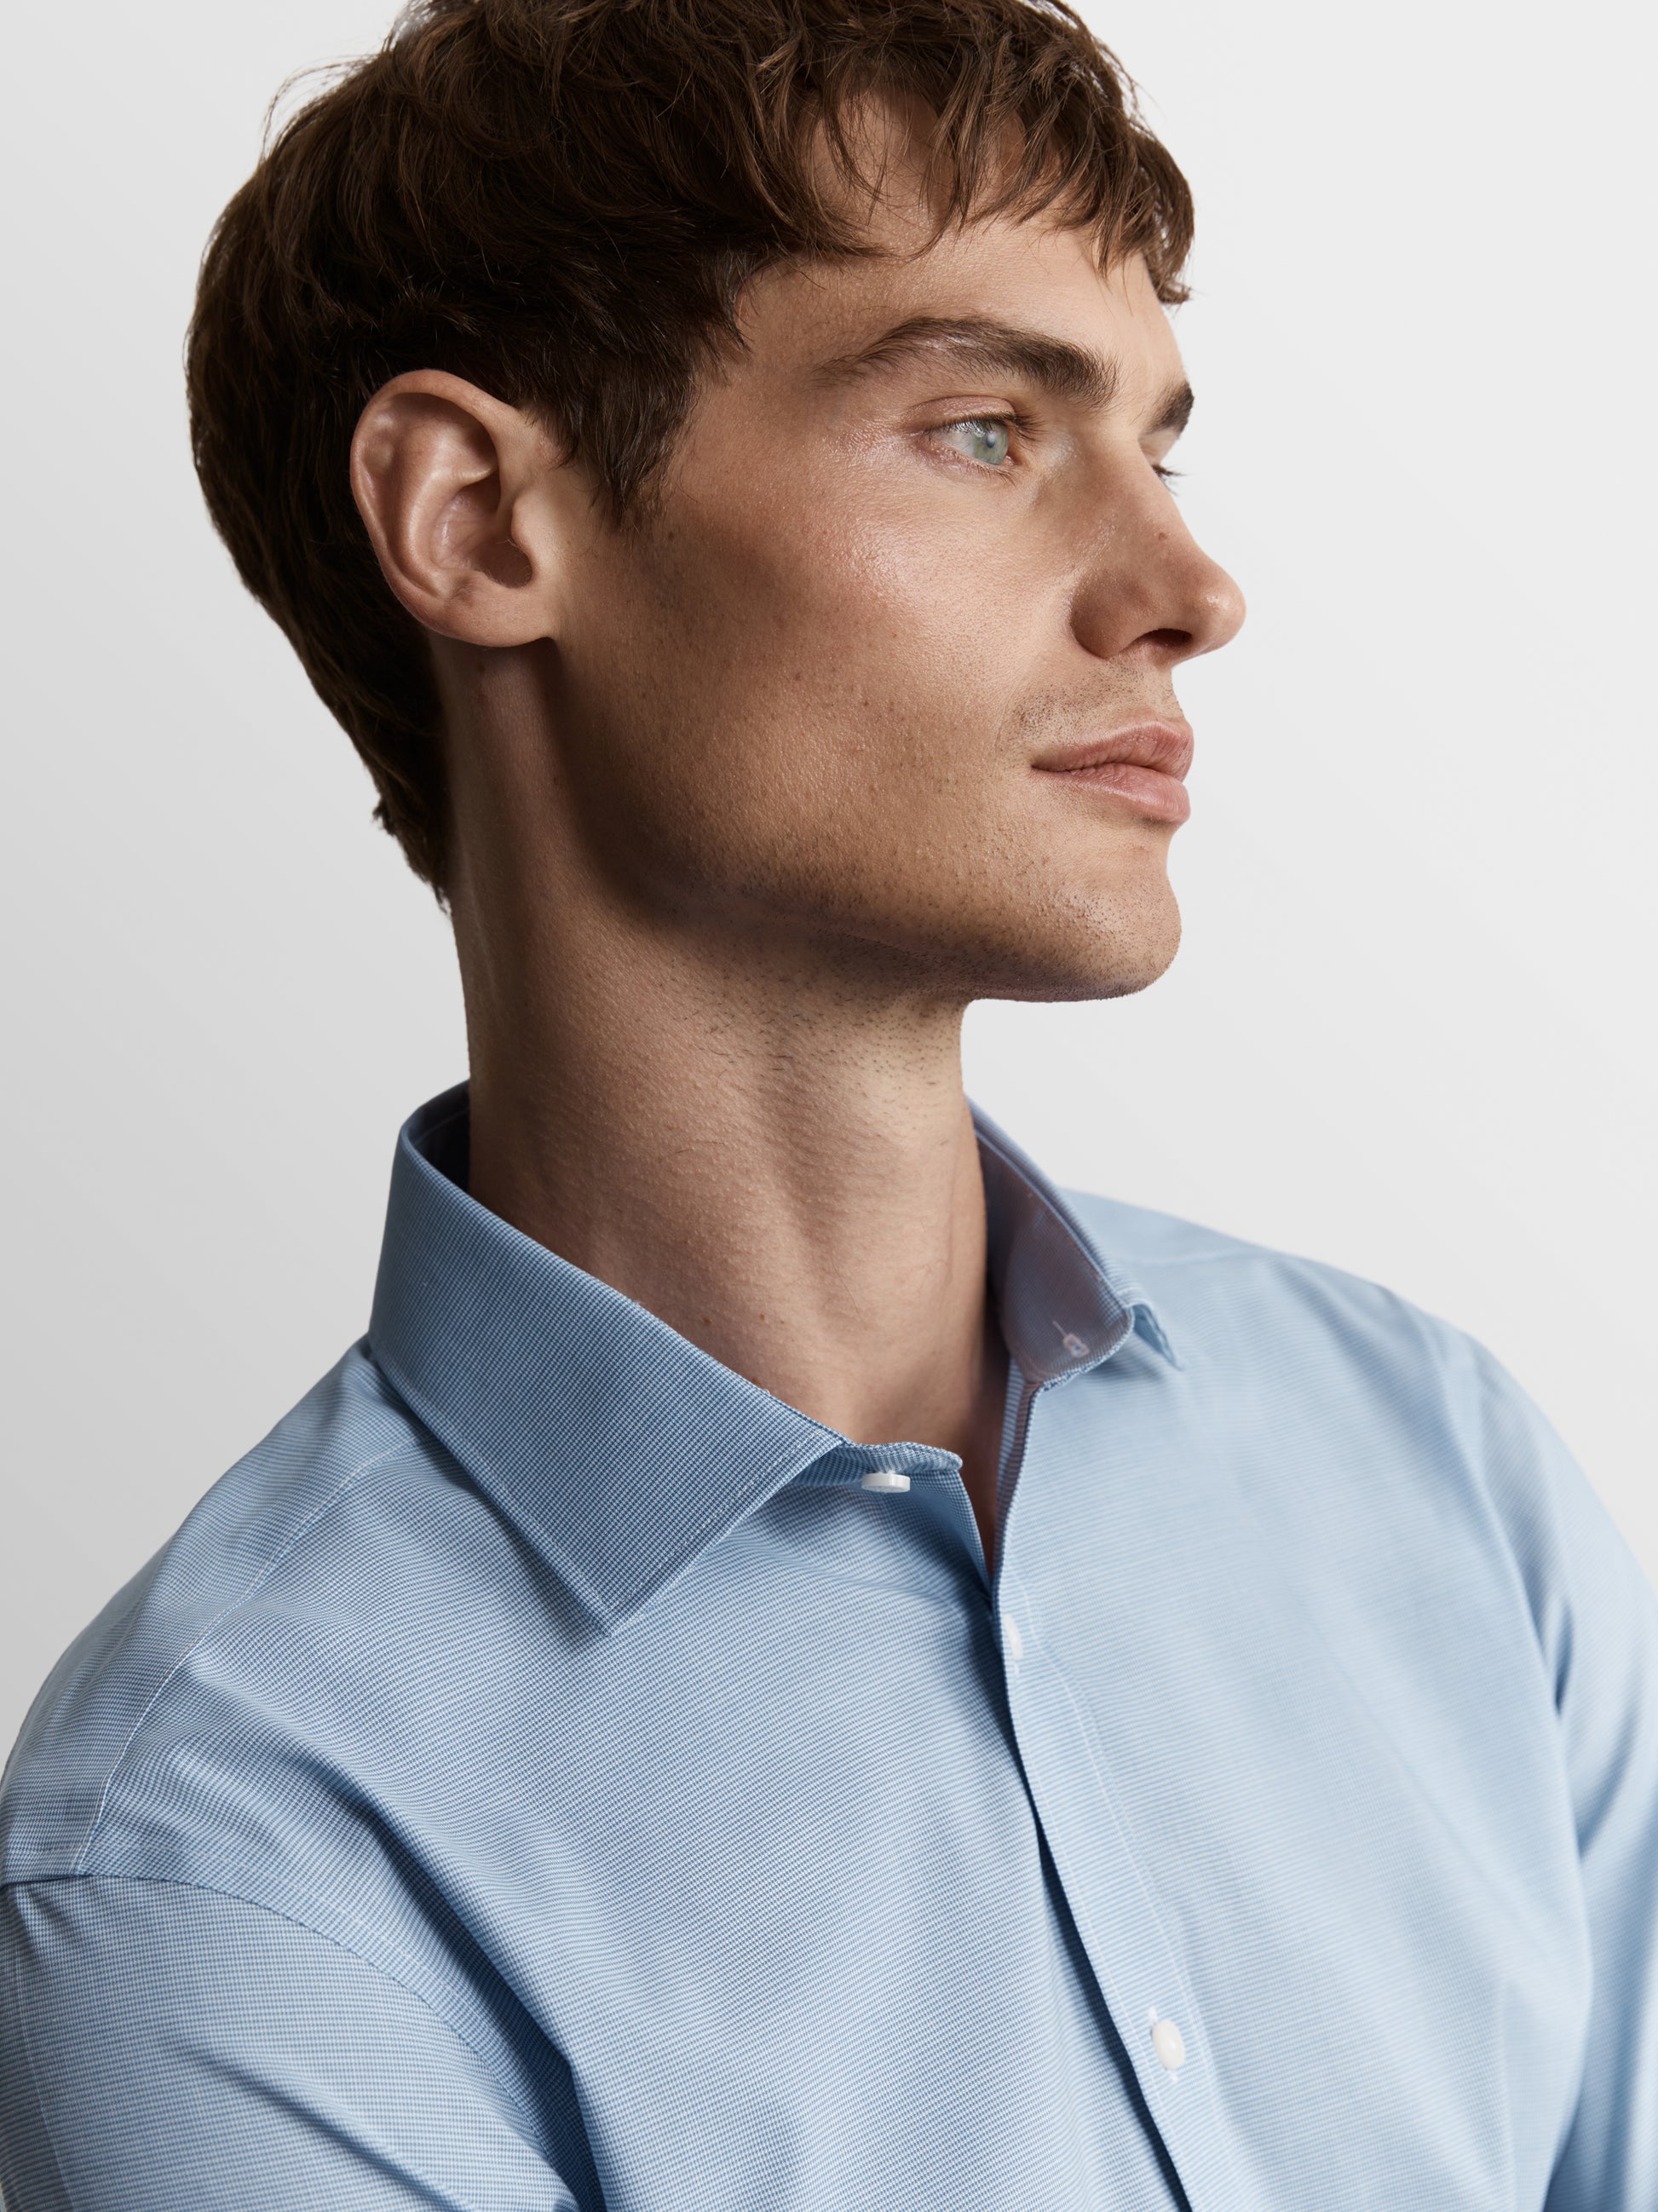 Image 1 of Max Performance Blue Puppytooth Plain Weave Fitted Single Cuff Classic Collar Shirt